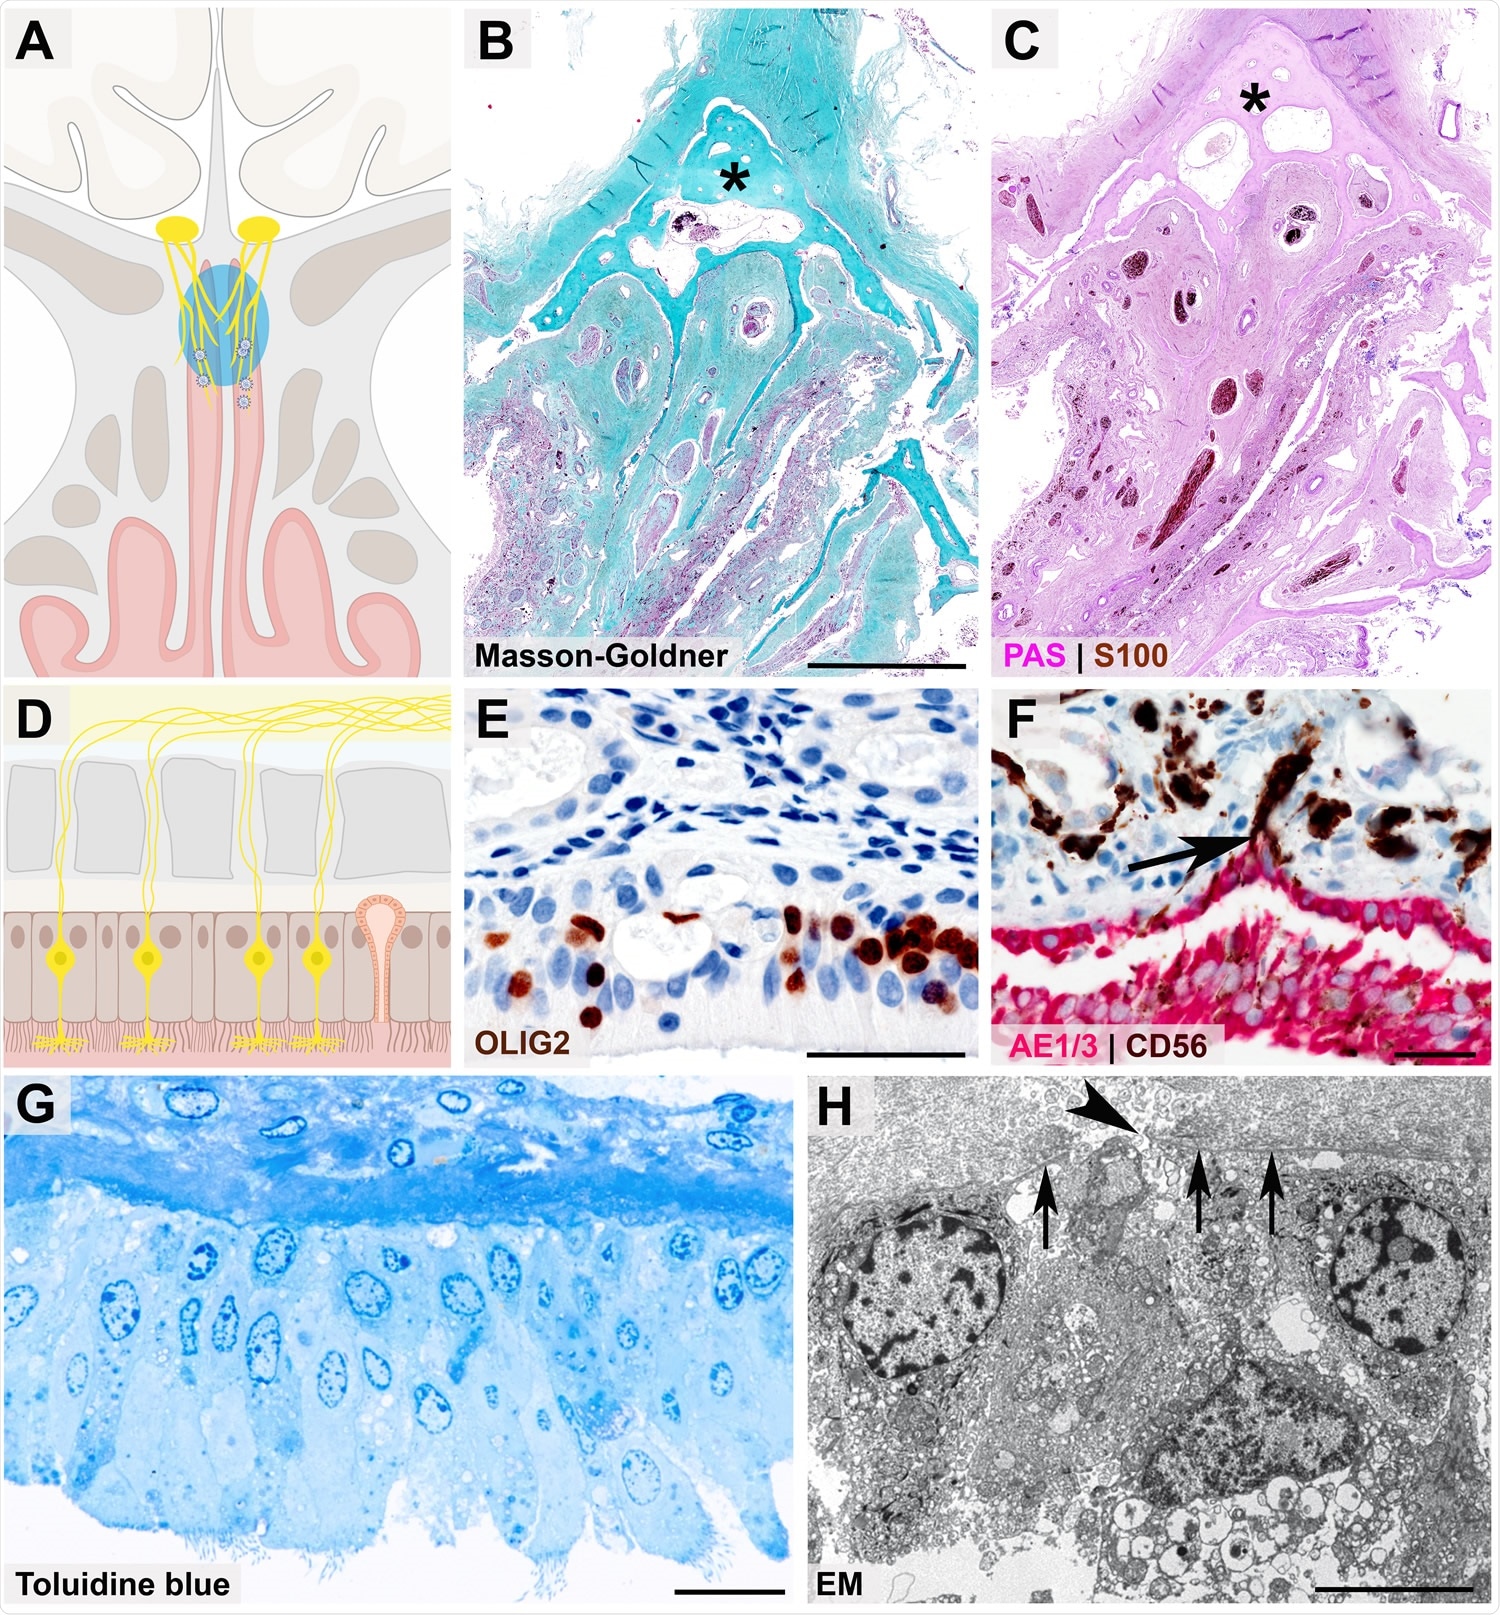 Close anatomical proximity of nervous and epithelial tissues in the olfactory mucosa Cartoon (A) and histopathological coronal cross-sections (B - C) depicting the paranasal sinus region with the osseous cribriform plate (turquoise color and asterisk in B, pink color and asterisk in C) and the close anatomical proximity of the olfactory mucosa (green in B, purple in C) and nervous tissue characterized by nerve fibers immunoreactive for S100 protein (C, brown color). Cartoon (D) resembling the olfactory mucosa, which is composed of pseudostratified ciliated columnar epithelium, basement membrane, and lamina propria, also containing mucus-secreting Bowman glands and bipolar olfactory receptor neurons (ORNs), which coalesce the epithelial layer. 368 Immunohistochemical staining of the olfactory mucosa (E, F) showing nuclear expression of OLIG2 specifying late neuronal progenitor and newly formed neurons (E, brown color)31 369 , which are closely intermingled with epithelial cells (F, immunoreactivity for the pancytokeratin marker AE1/3, red color). The basement membrane underneath the columnar AE1/3-positive epithelium (F, red color) is discontinued due to CD56-positive (F, brown color) axonal projections of ORNs (F, arrow). The ORN 3dendrite carries multiple cilia and protrudes into the nasal cavity (G, semithin section, toluidine blue staining), while the axon (H, arrowhead) crosses the olfactory mucosa basement membrane (H, 3arrows) as a precondition for ORN projection into the glomeruli of the olfactory bulb, which is readily 3visible at the ultrastructural level). Scale bars: B: 3.5 cm; E, F: 50 µm; G: 20 µm; H: 5 µm.